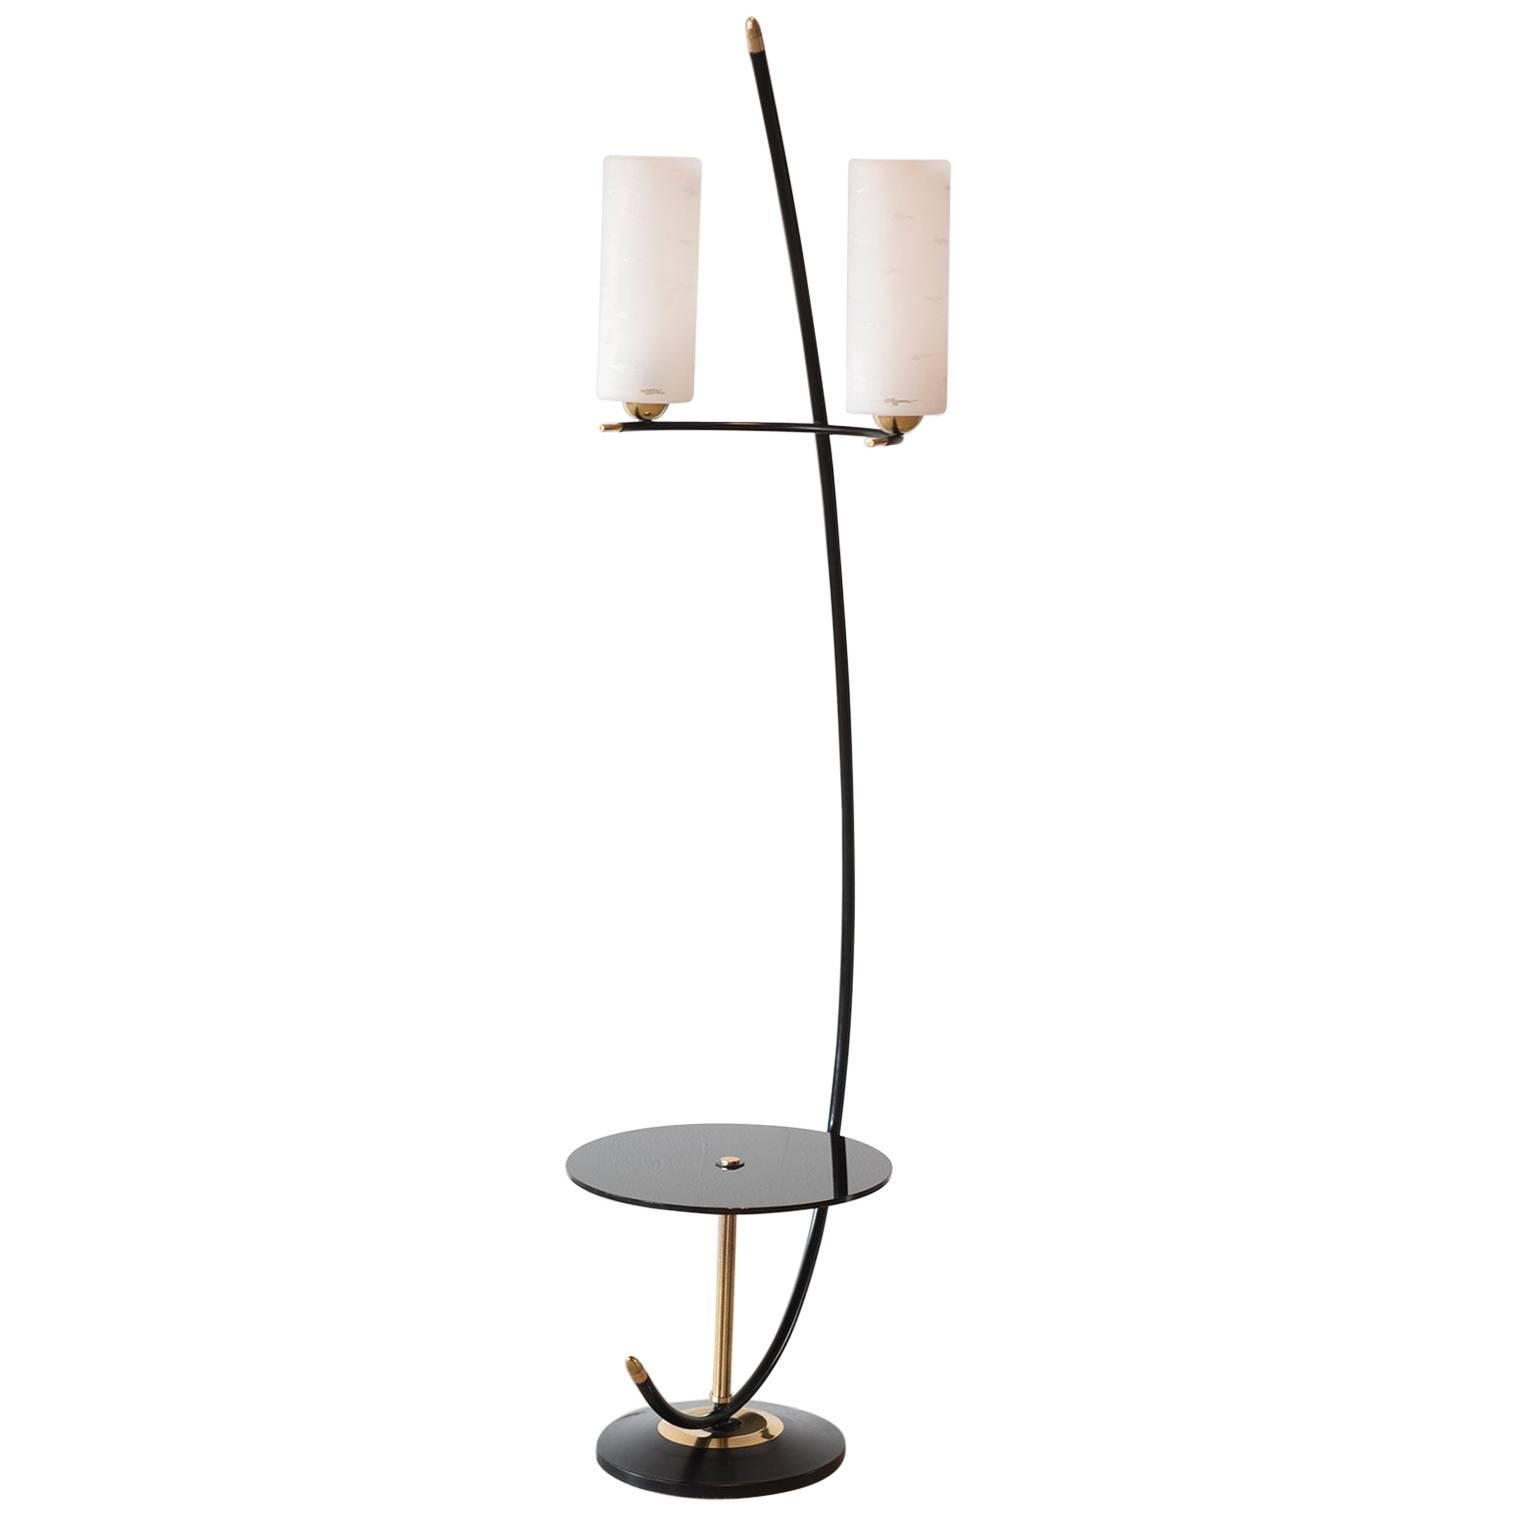 French Floor Lamp in Brass and Black Lacquer with Etched Glass Diffusers, 1950s For Sale